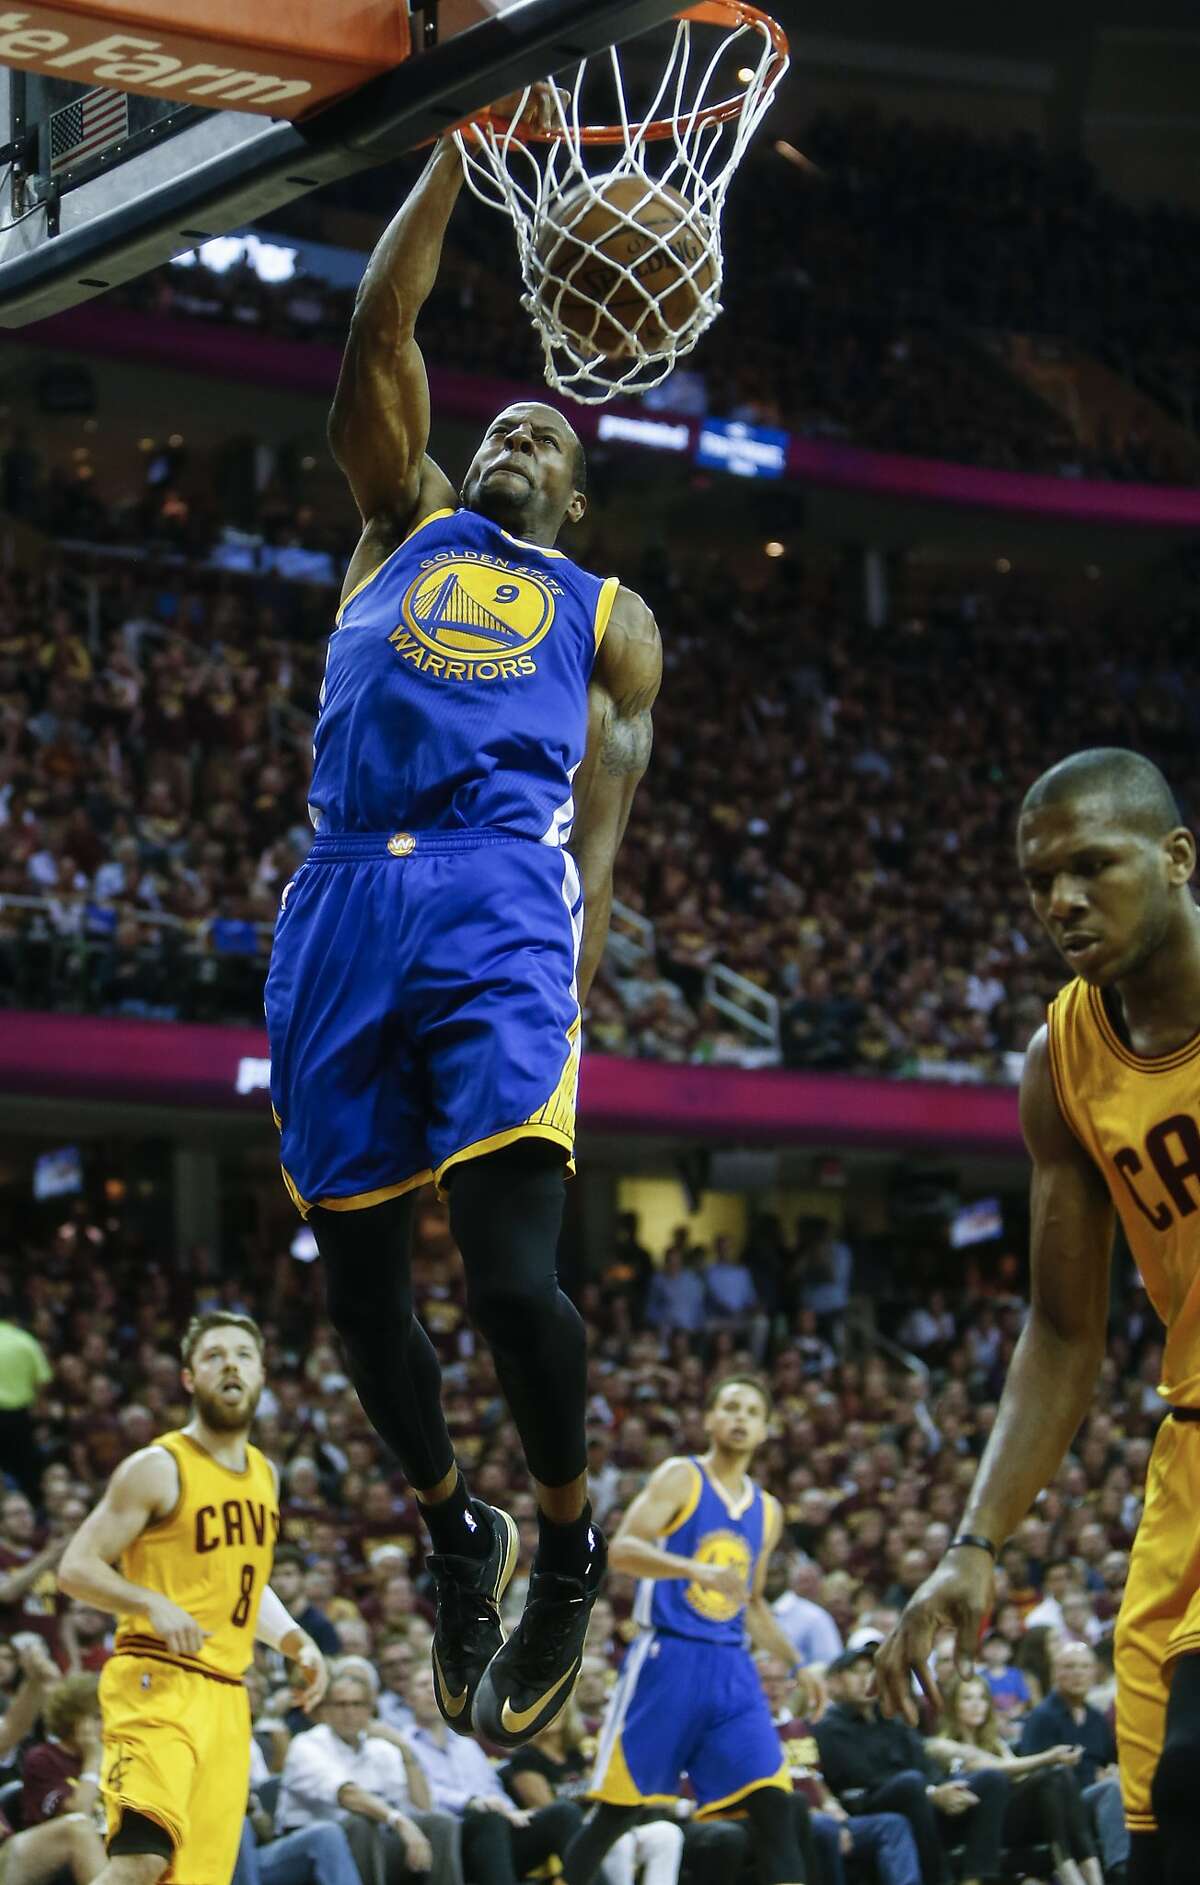 Golden State Warriors' Andre Iguodala dunks the ball in the first period during Game 4 of The NBA Finals between the Golden State Warriors and Cleveland Cavaliers at The Quicken Loans Arena on Thursday, June 11, 2015 in Cleveland, Ohio.